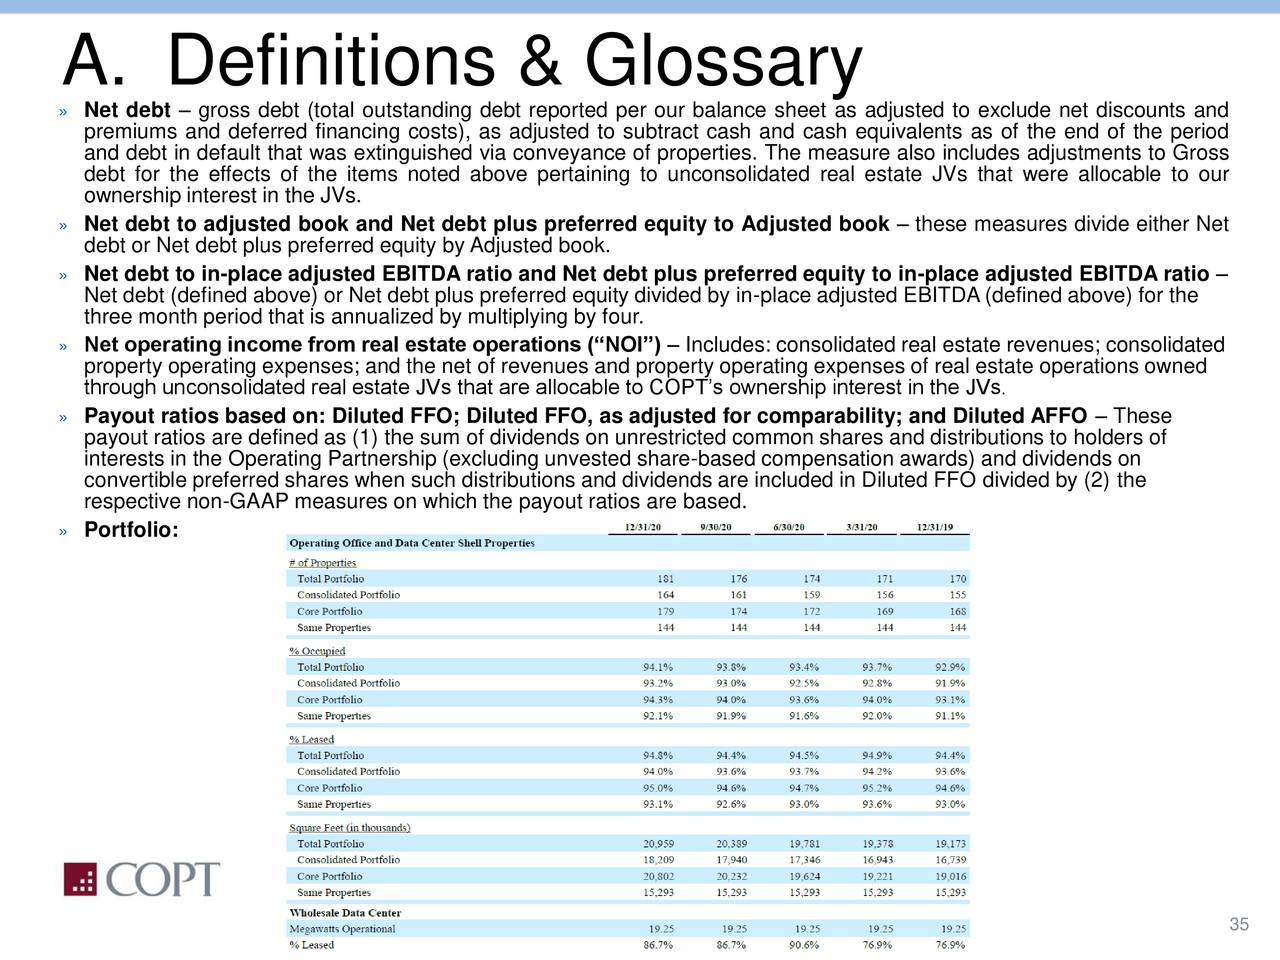 A. Definitions & Glossary